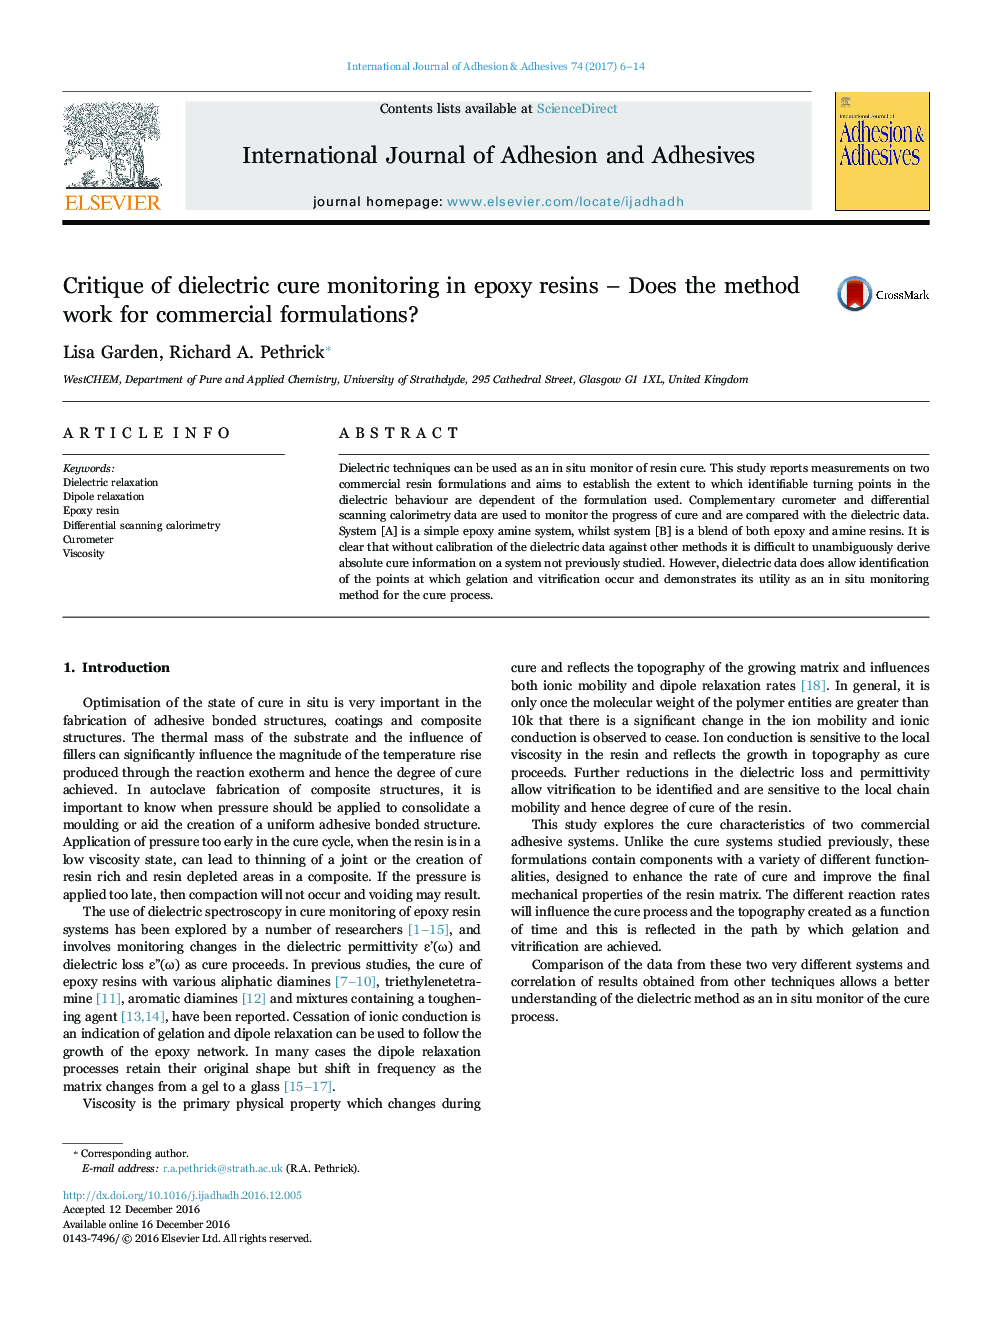 Critique of dielectric cure monitoring in epoxy resins - Does the method work for commercial formulations?